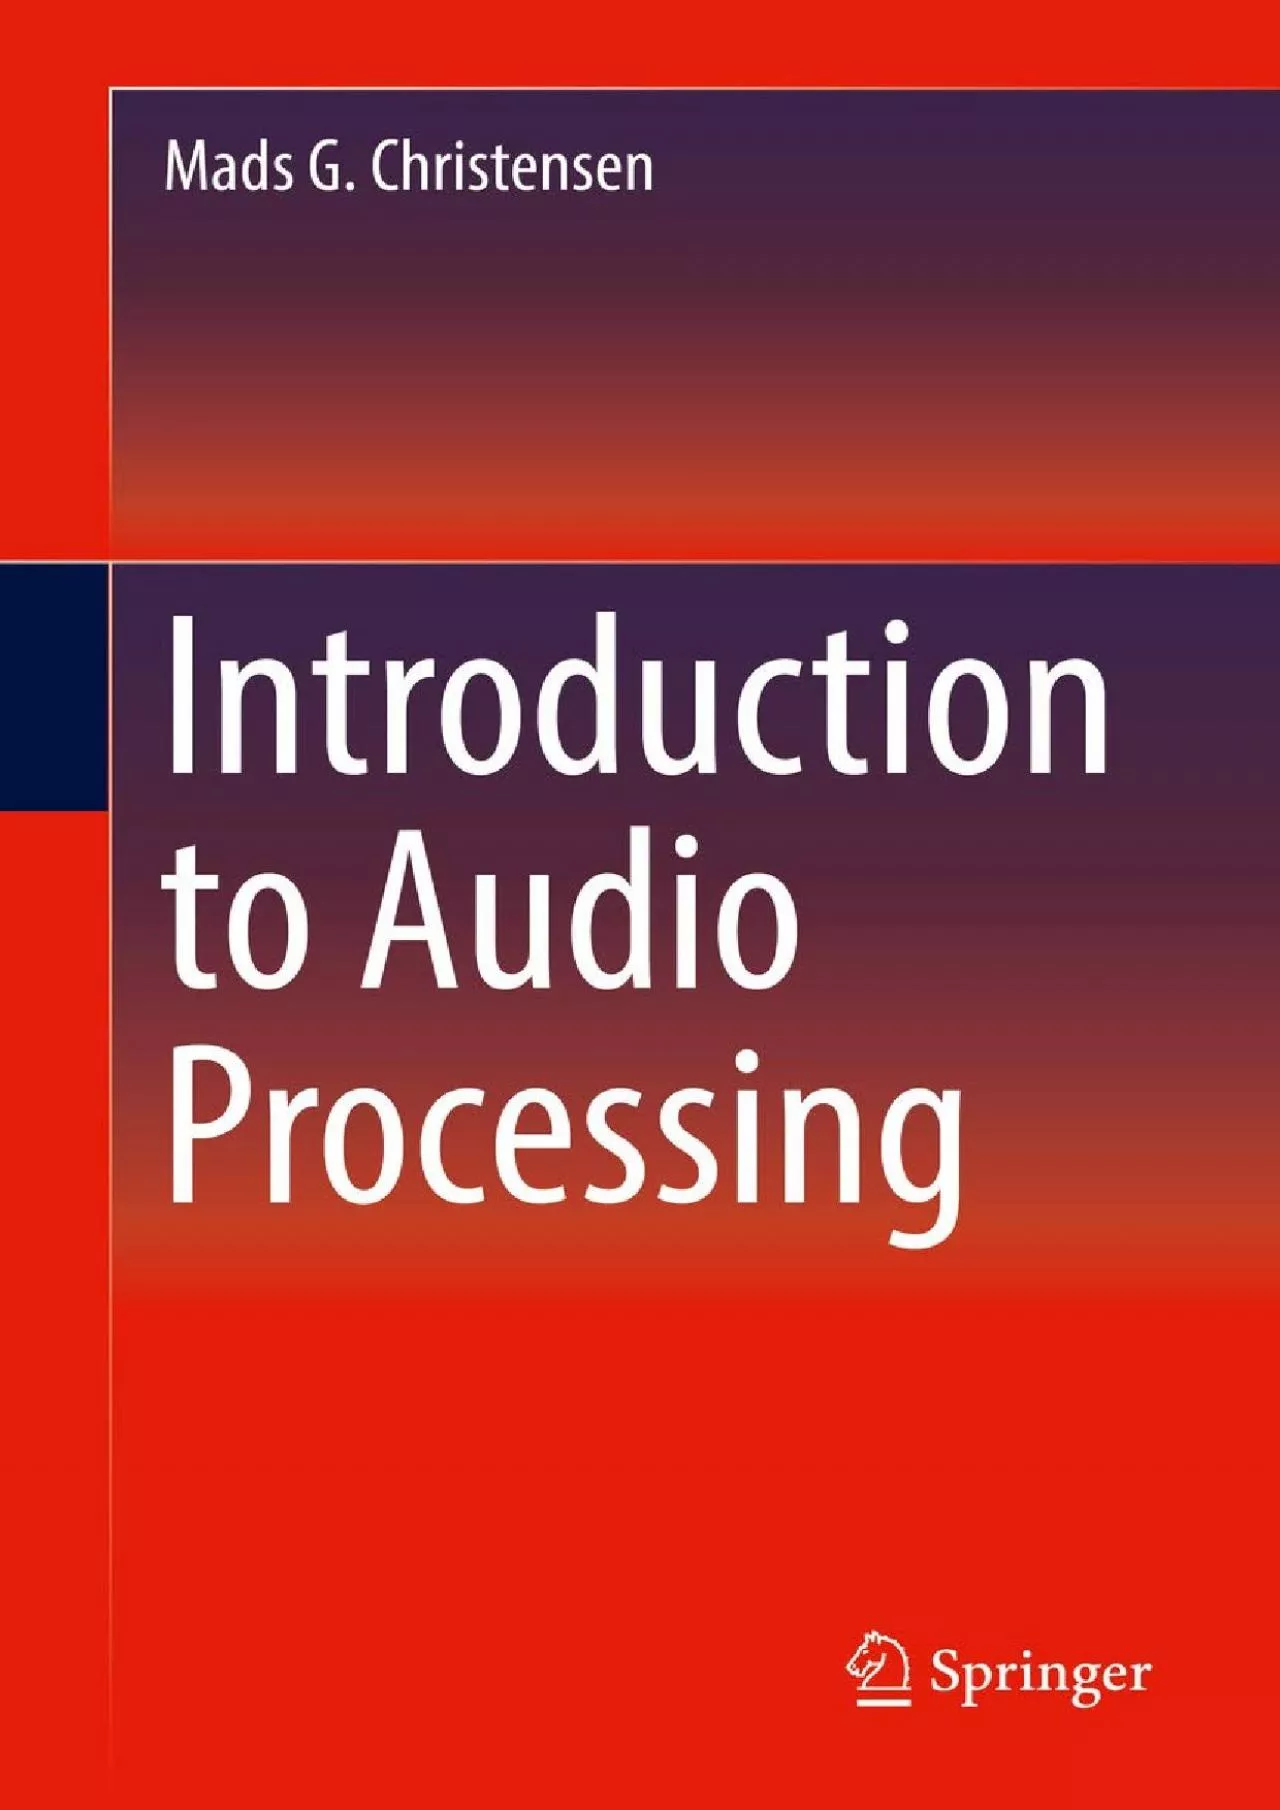 (EBOOK)-Introduction to Audio Processing